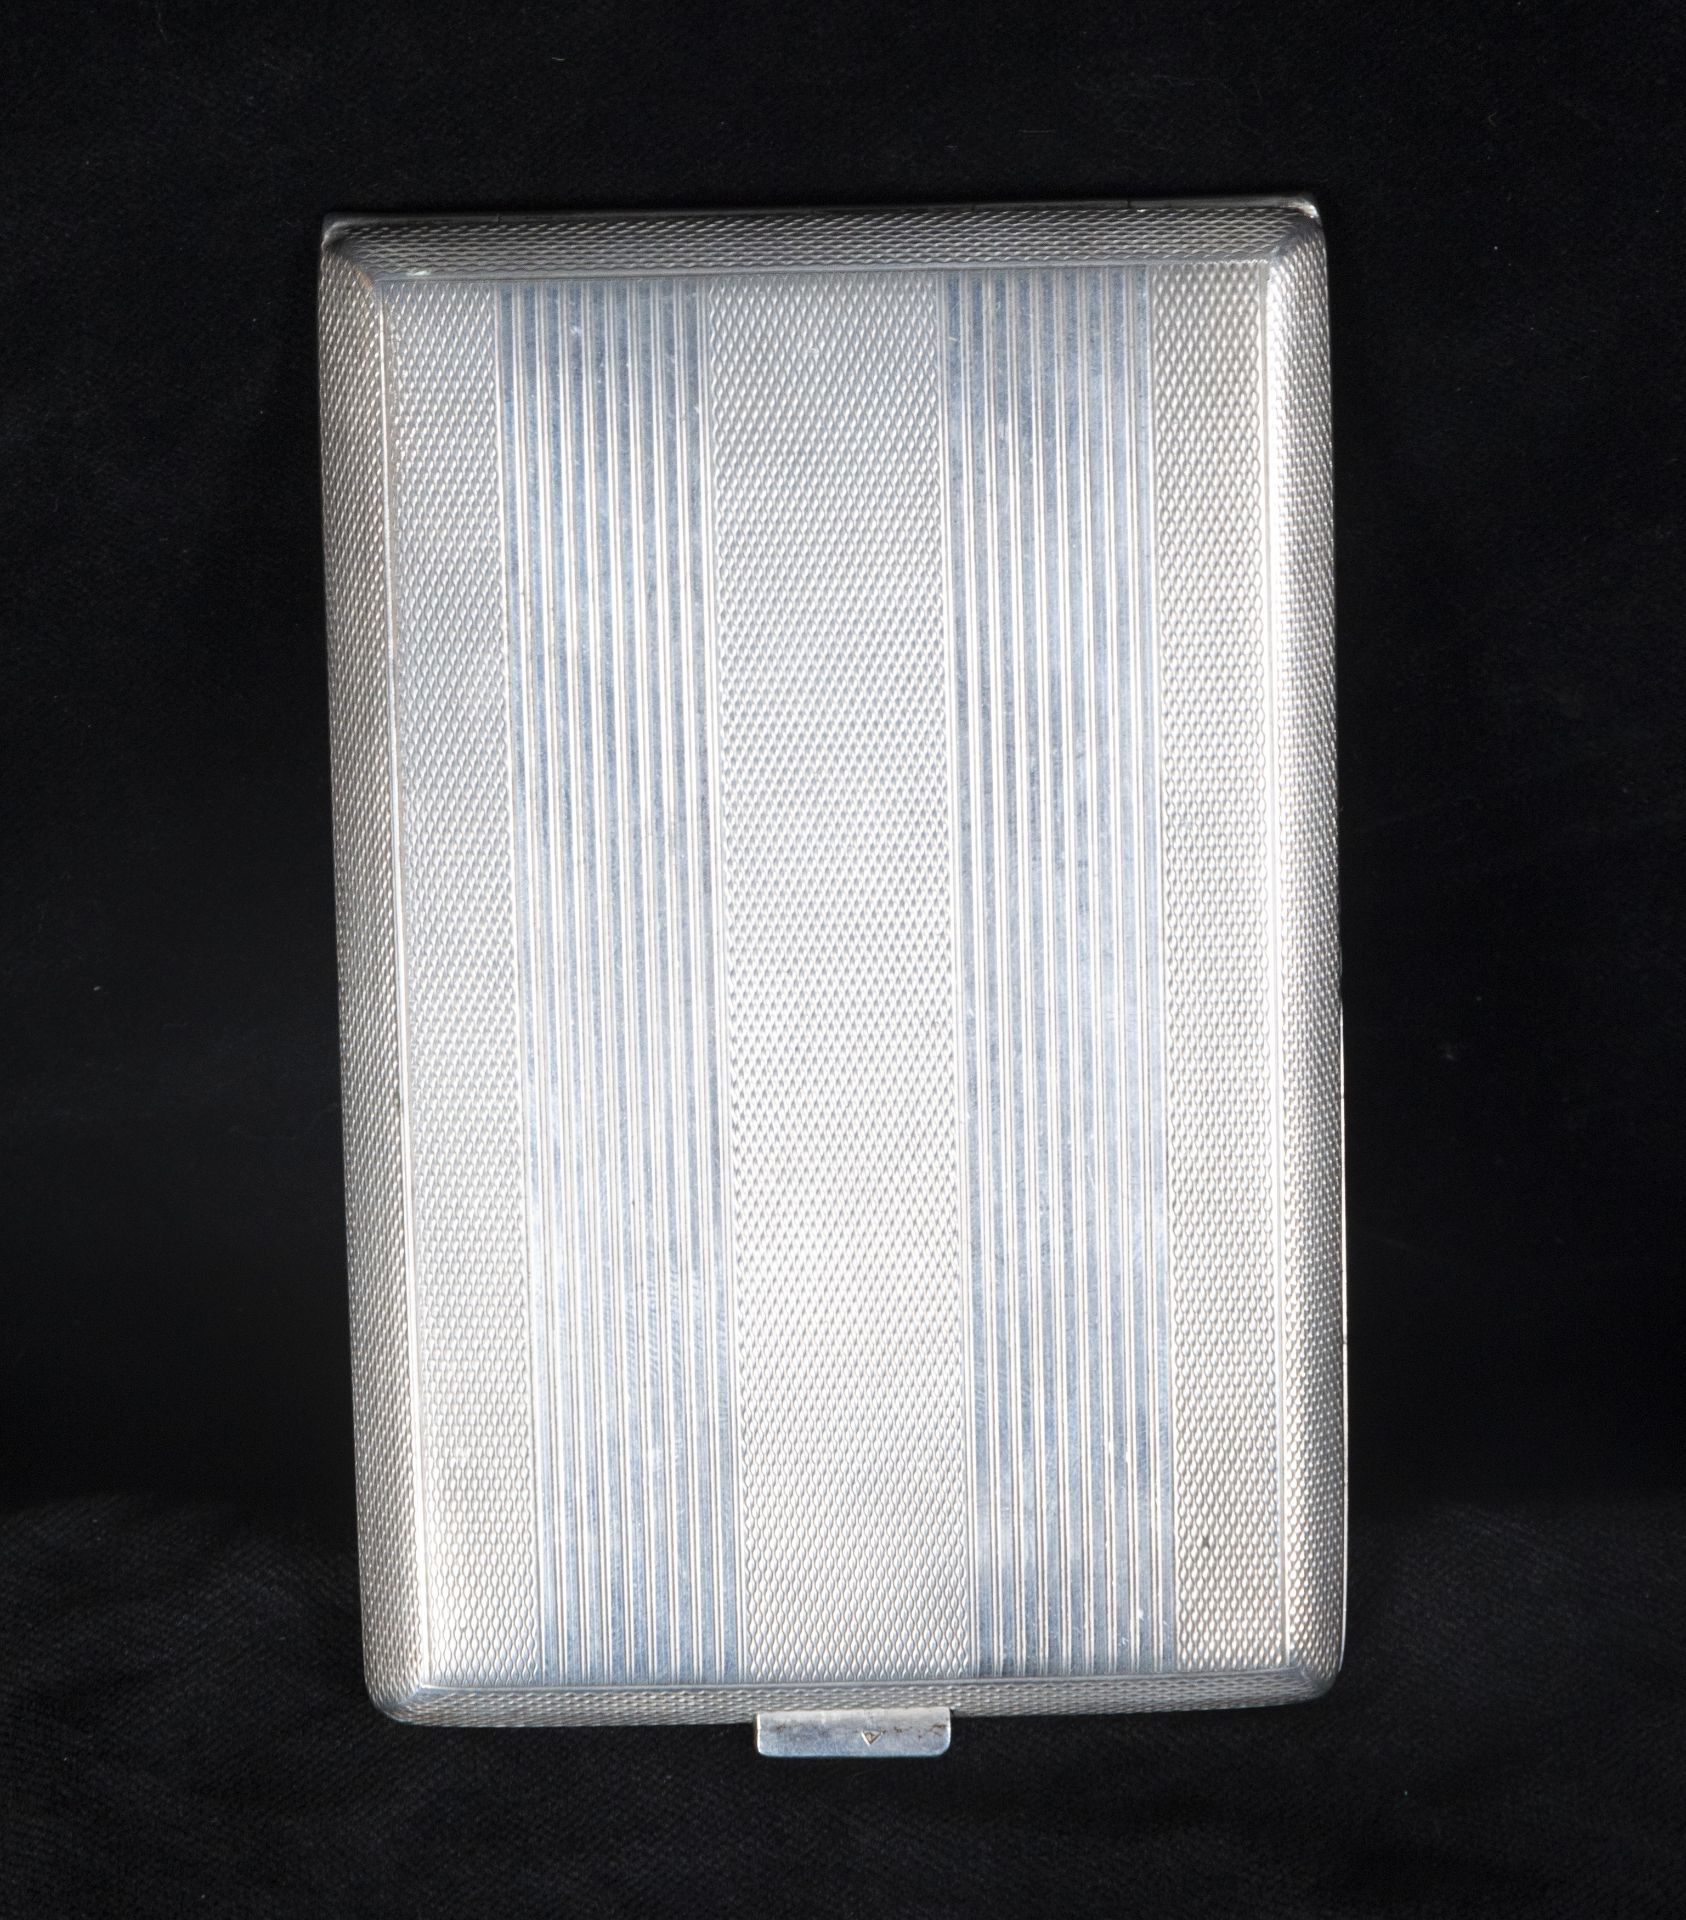 Silver cigarette case, early 20th century - Image 2 of 2